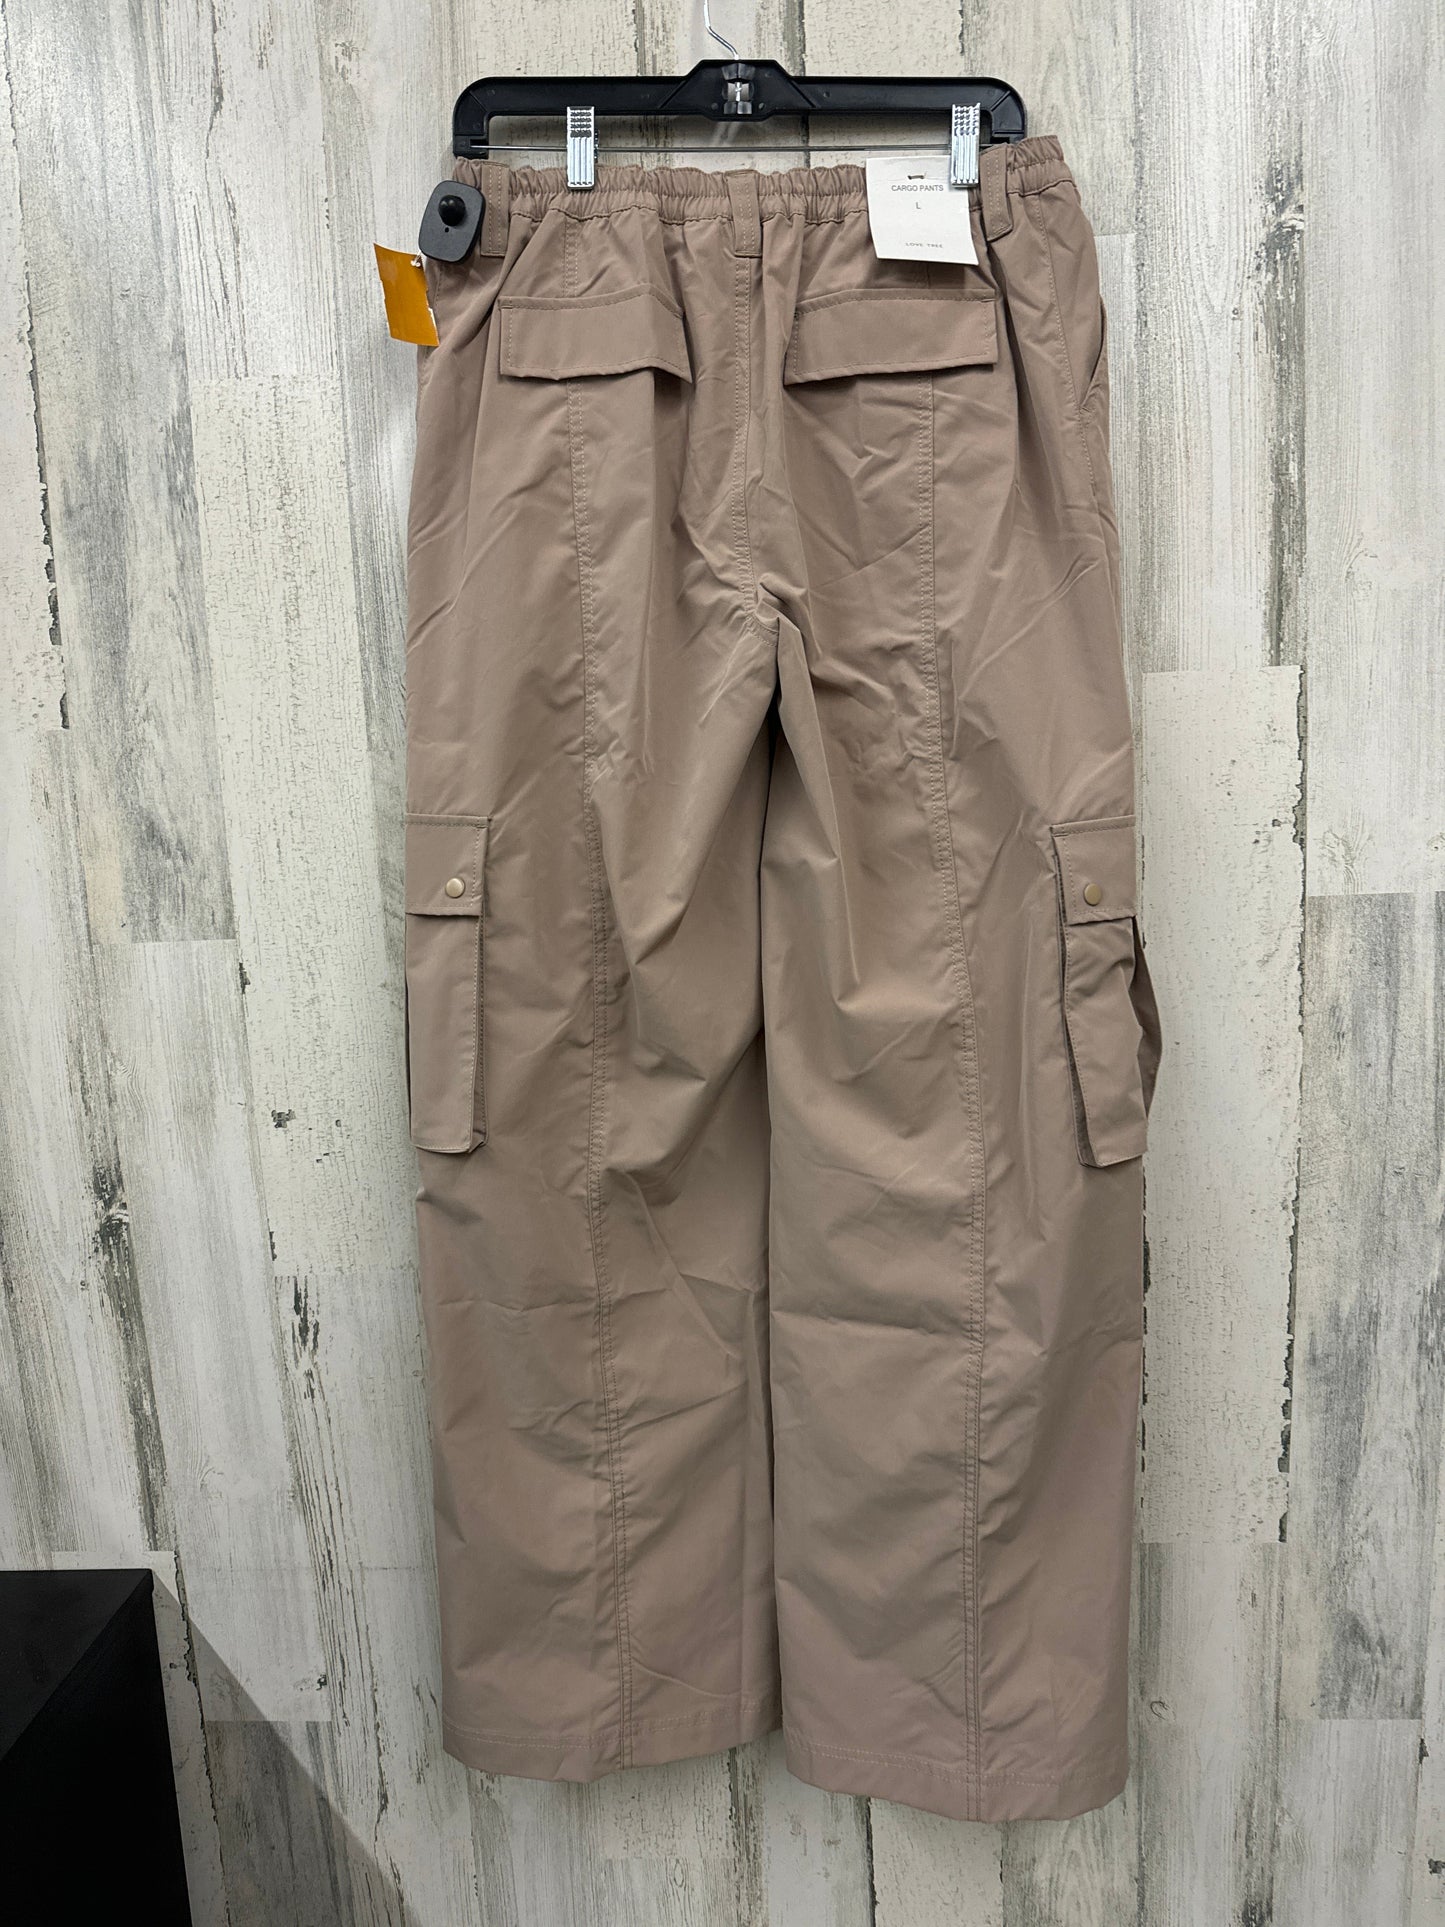 Pants Cargo & Utility By Love Tree  Size: L